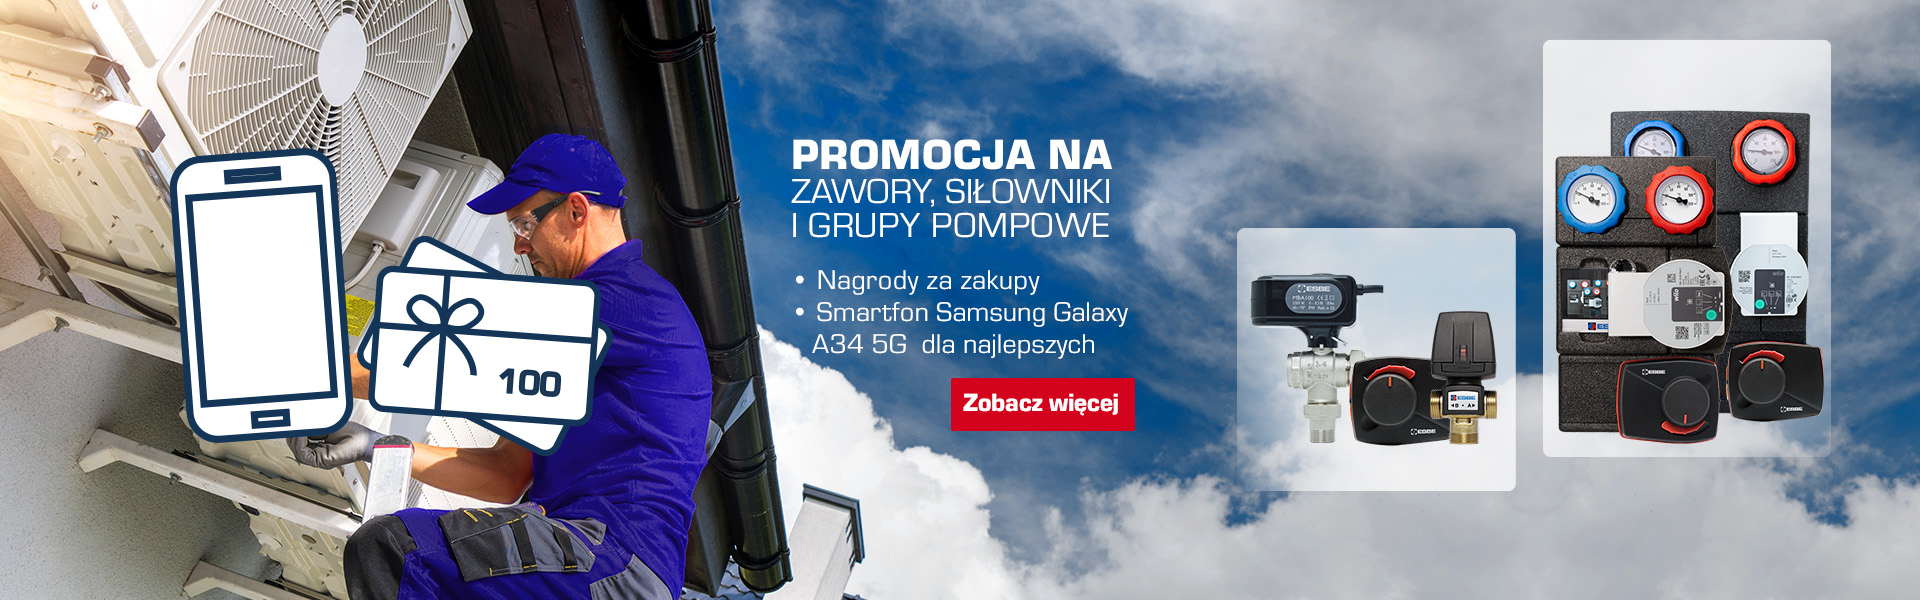 Banner_PL promotion_July_1920x600px_vers A.jpg